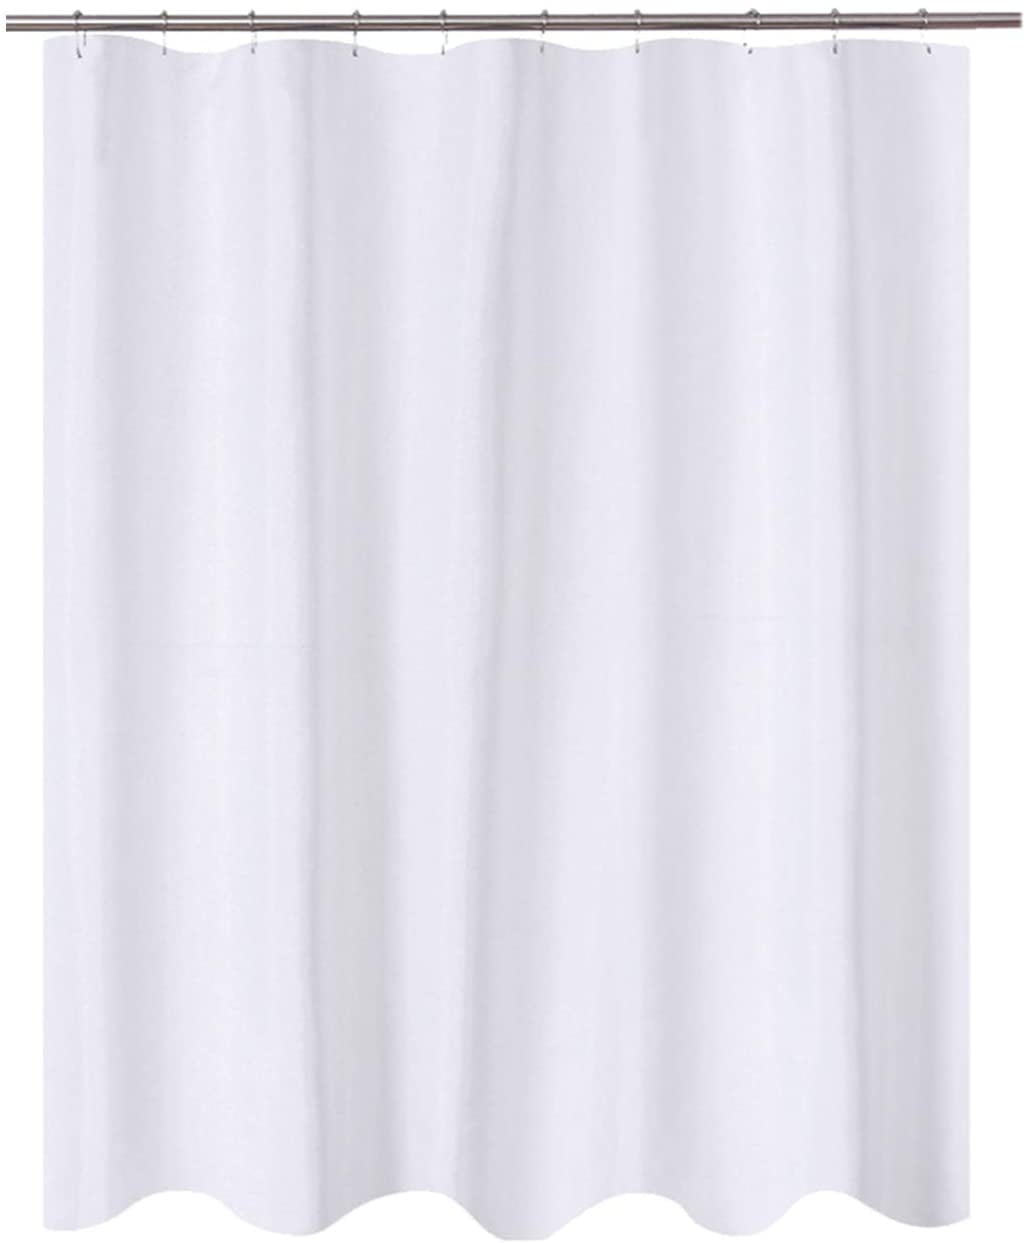 Rv Shower Curtain Or Liner Fabric 60 X, What Is The Size Of Shower Curtains